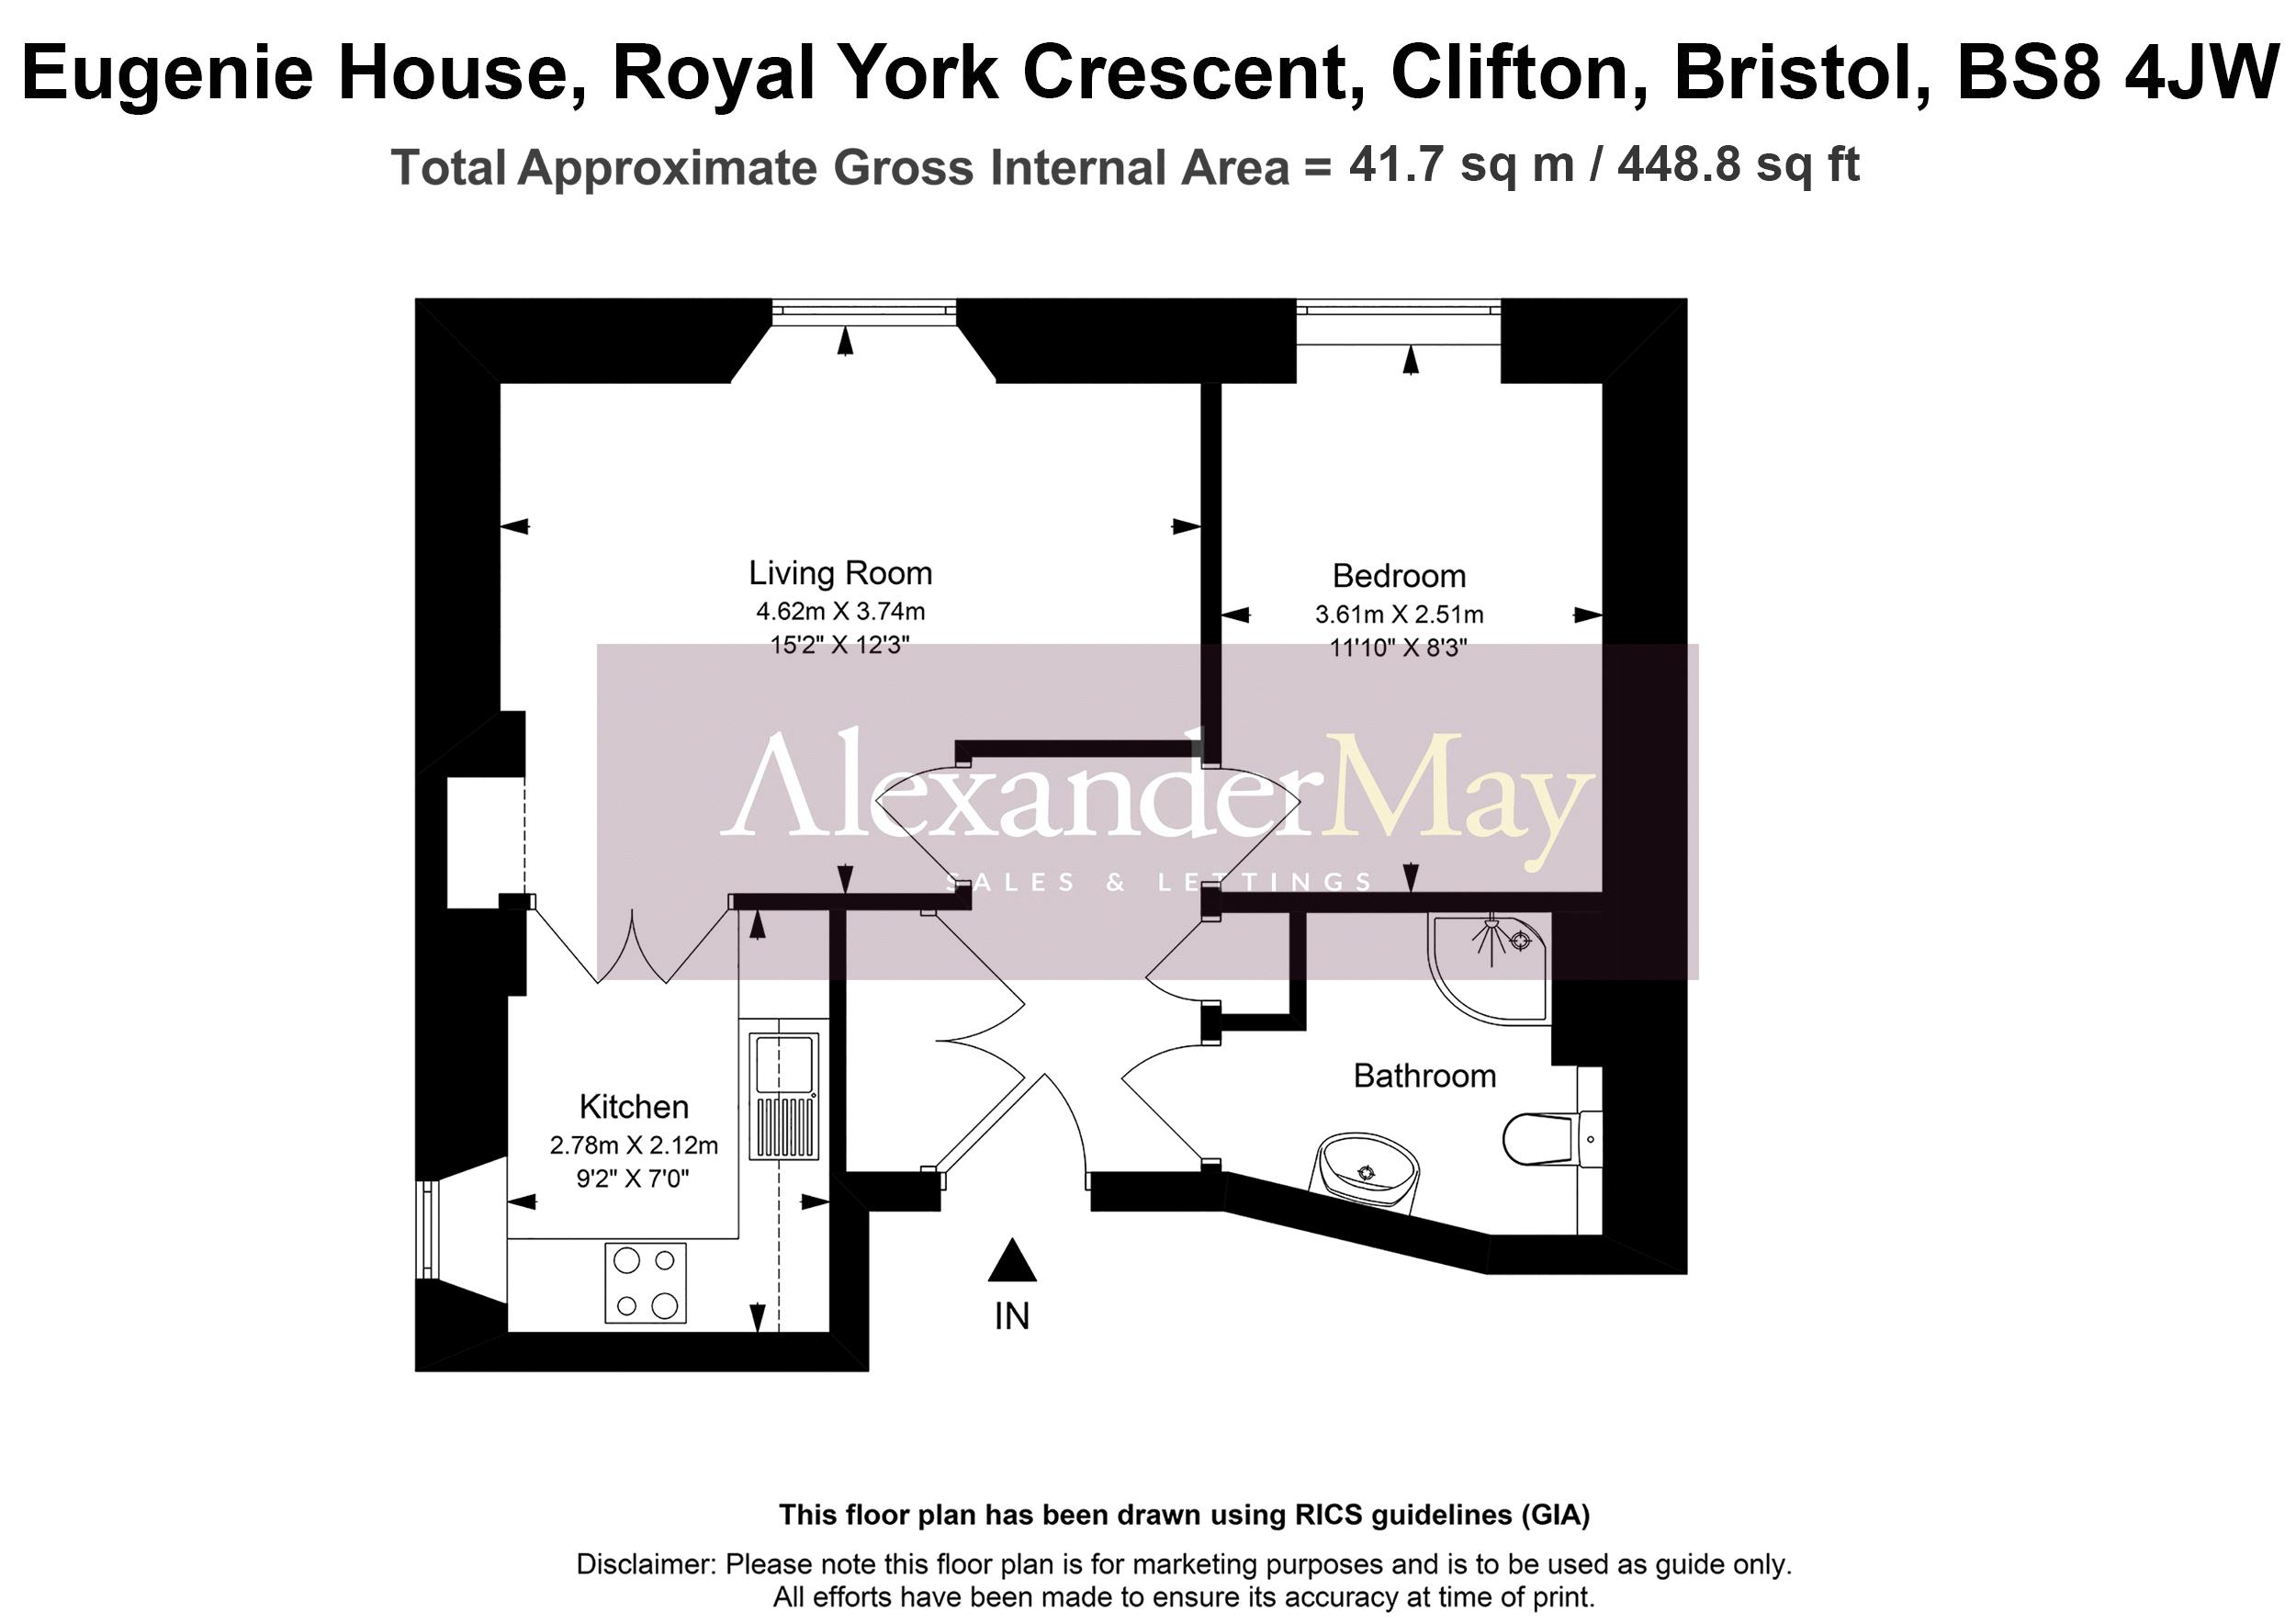 1 bed for sale in Eugenie House, Royal York Crescent - Property Floorplan